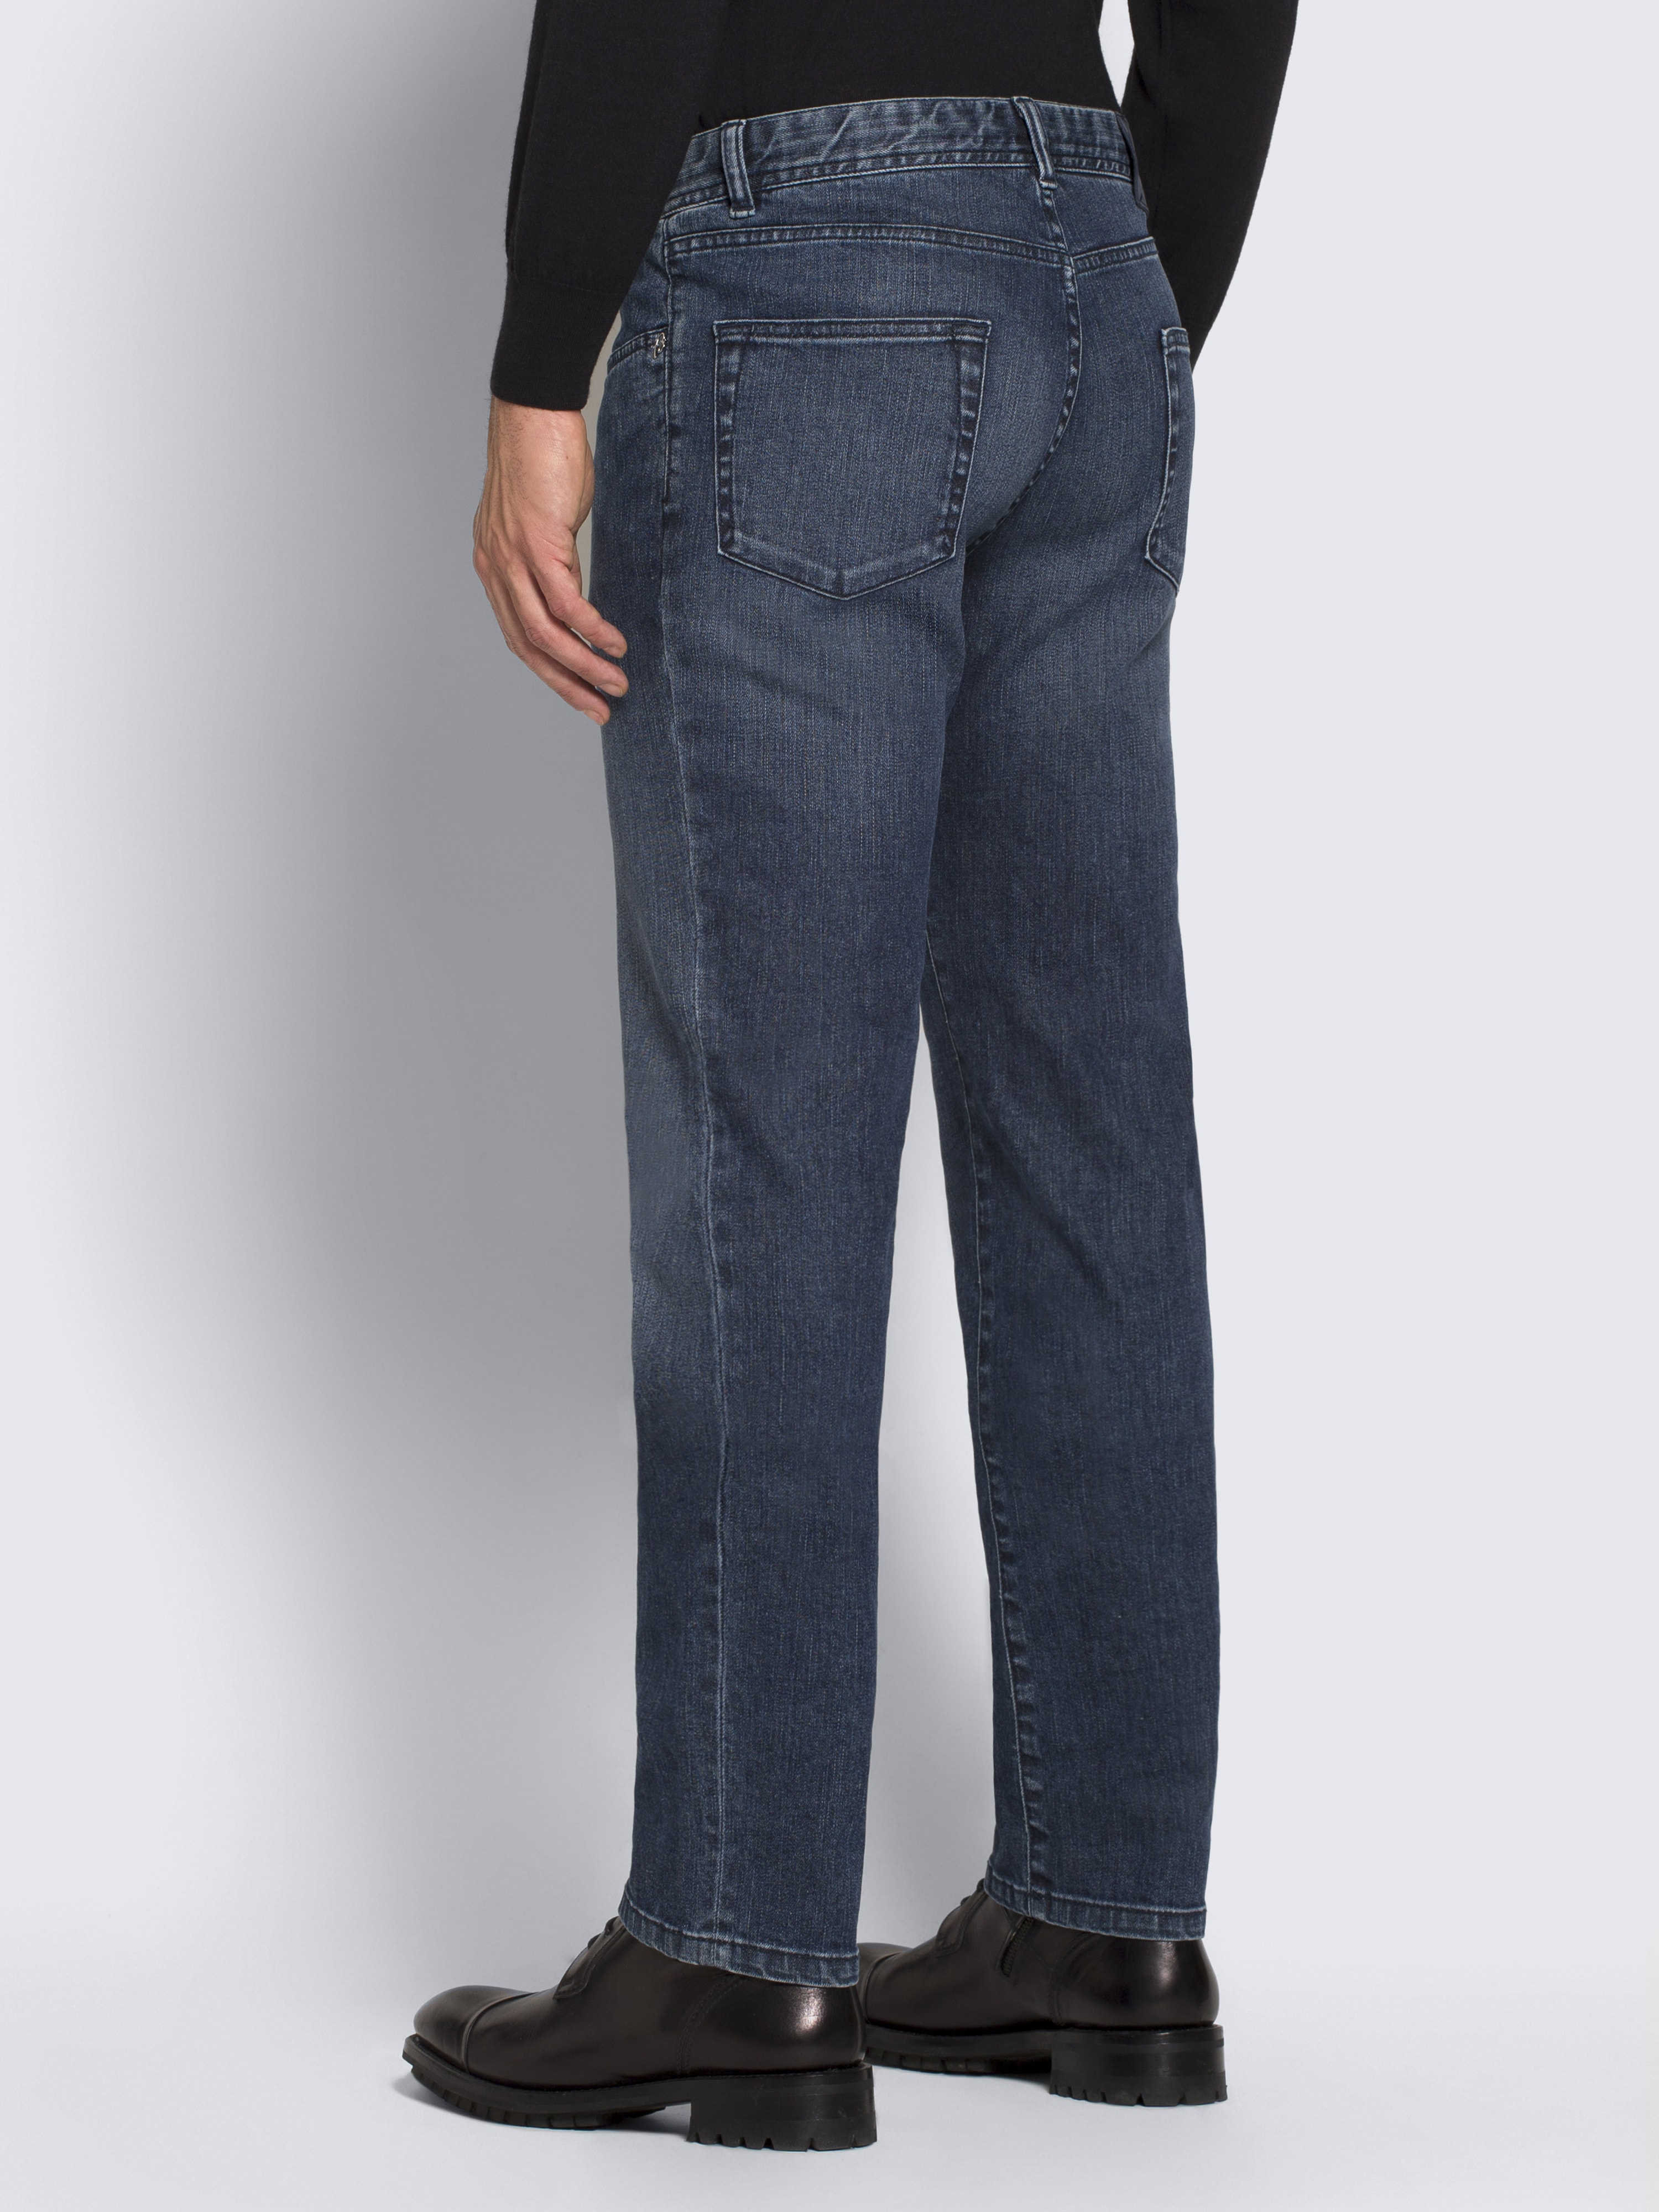 Essential' navy blue regular fit jeans | Brioni® US Official Store